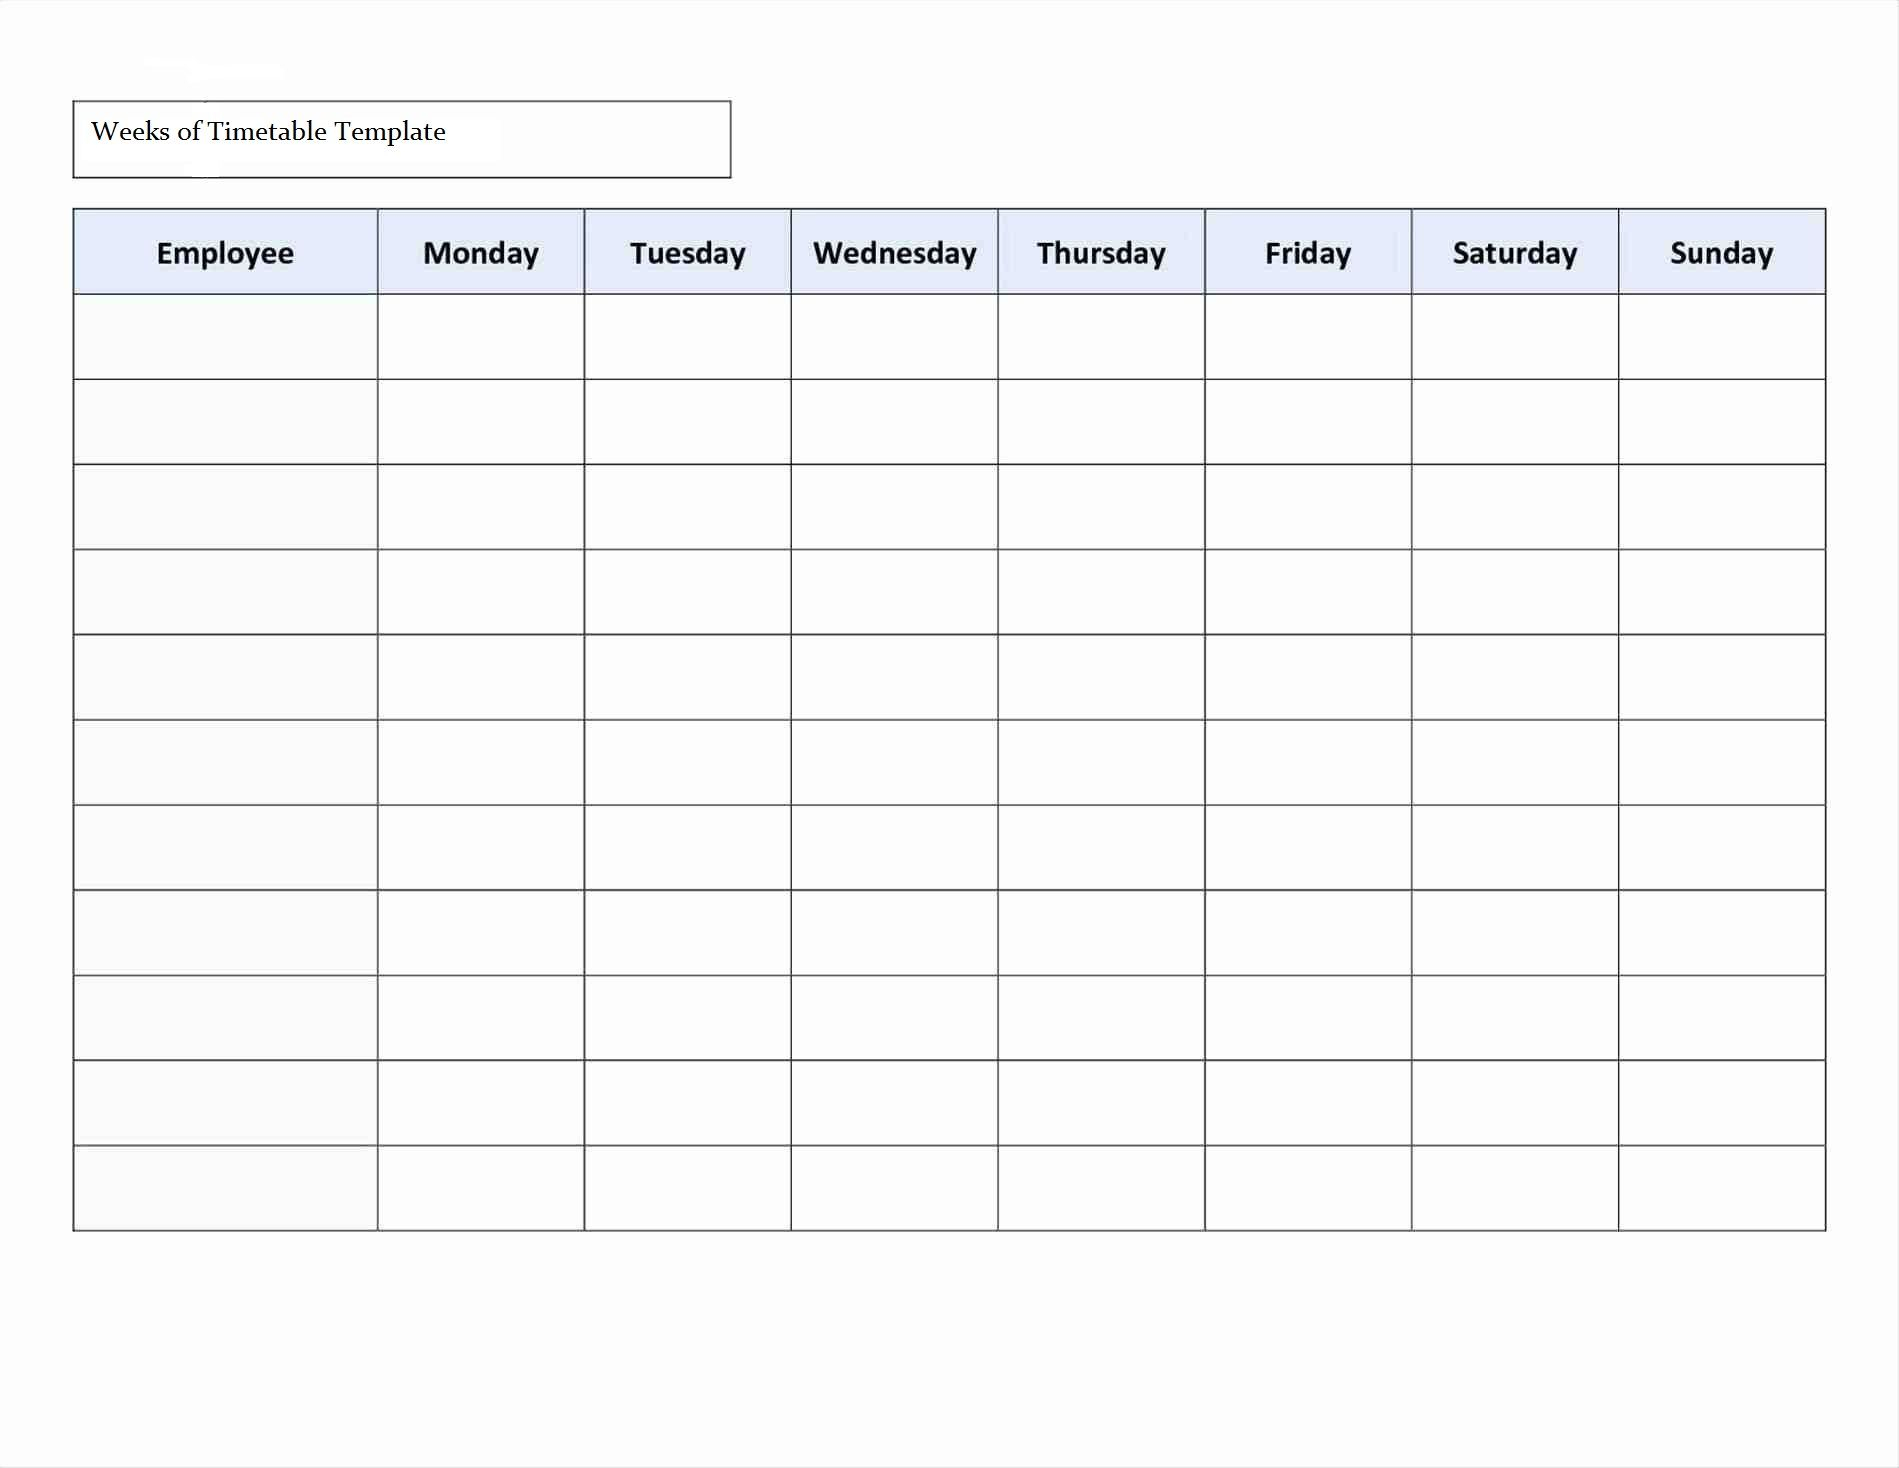 Timetable Template #dailytimetabletemplate | Daily Schedule